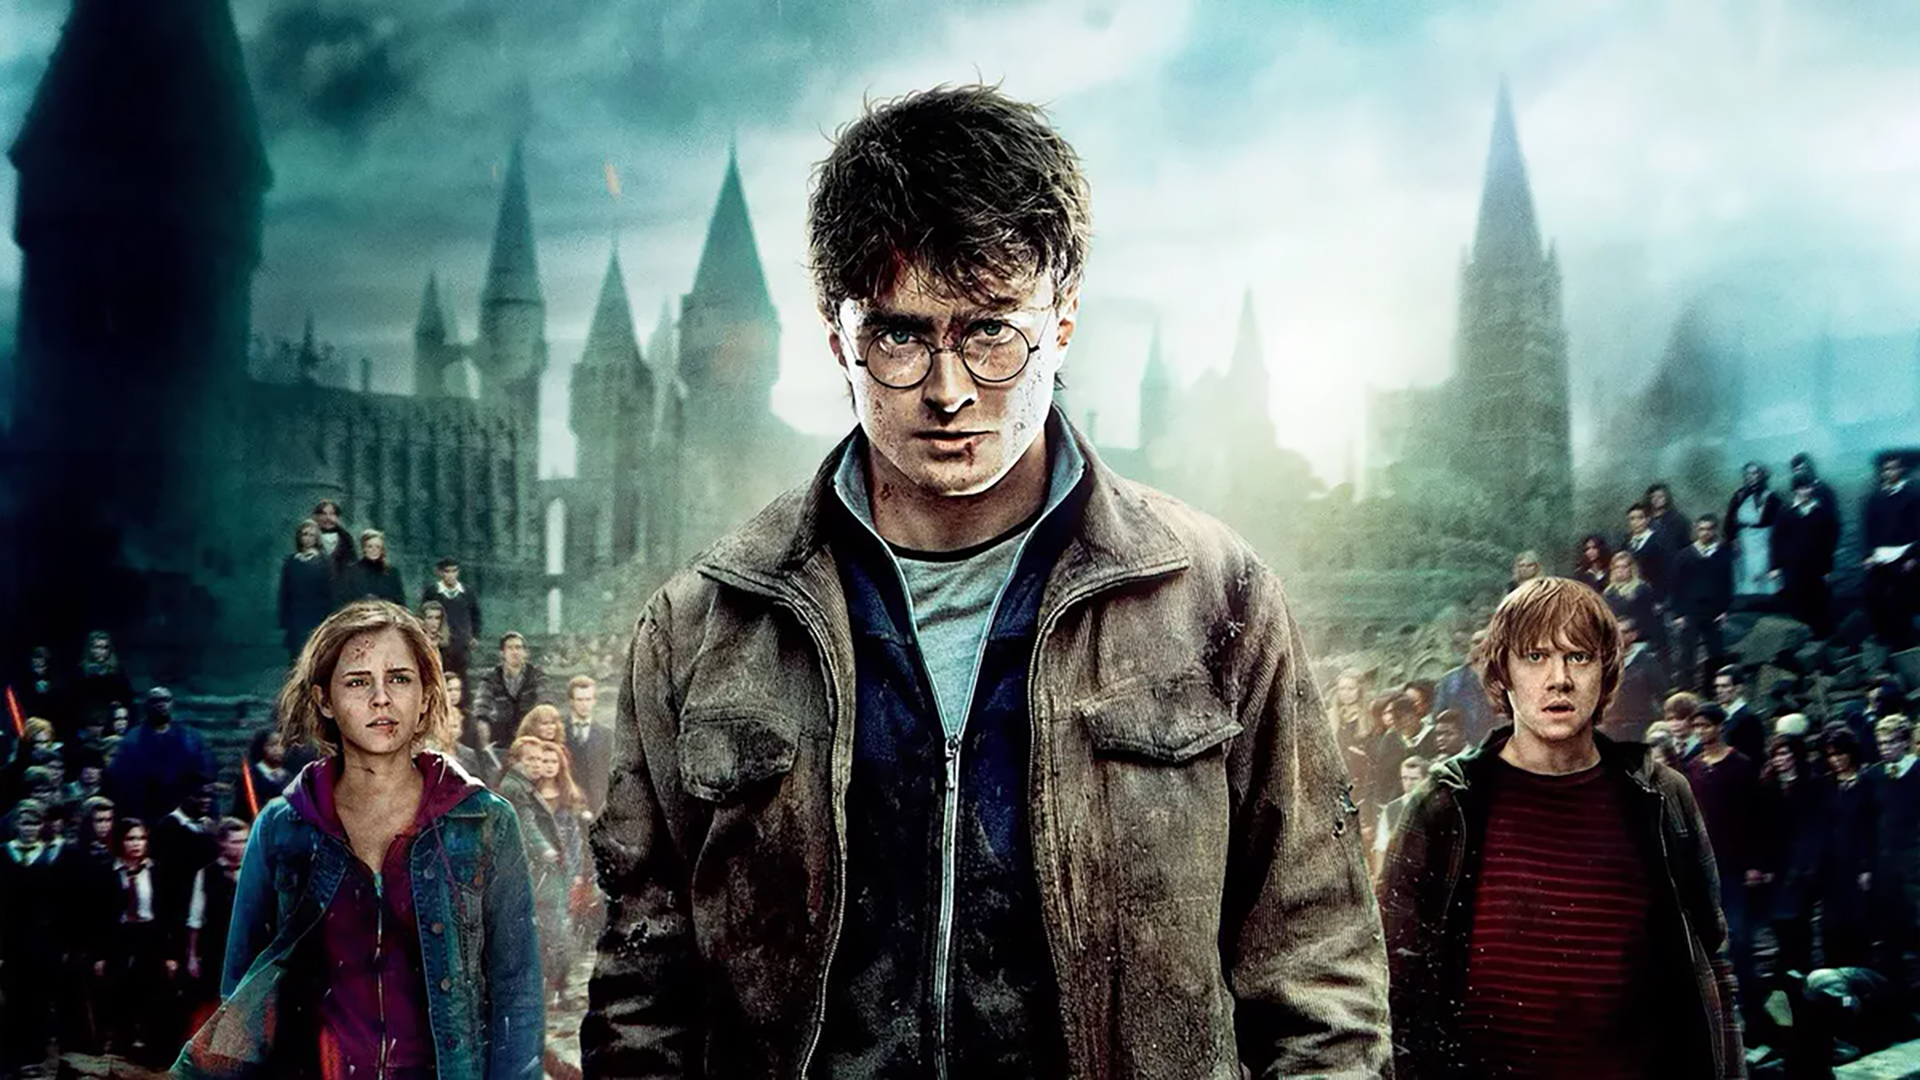 15 Things That Happened to Harry Potter Characters After The Books Ended